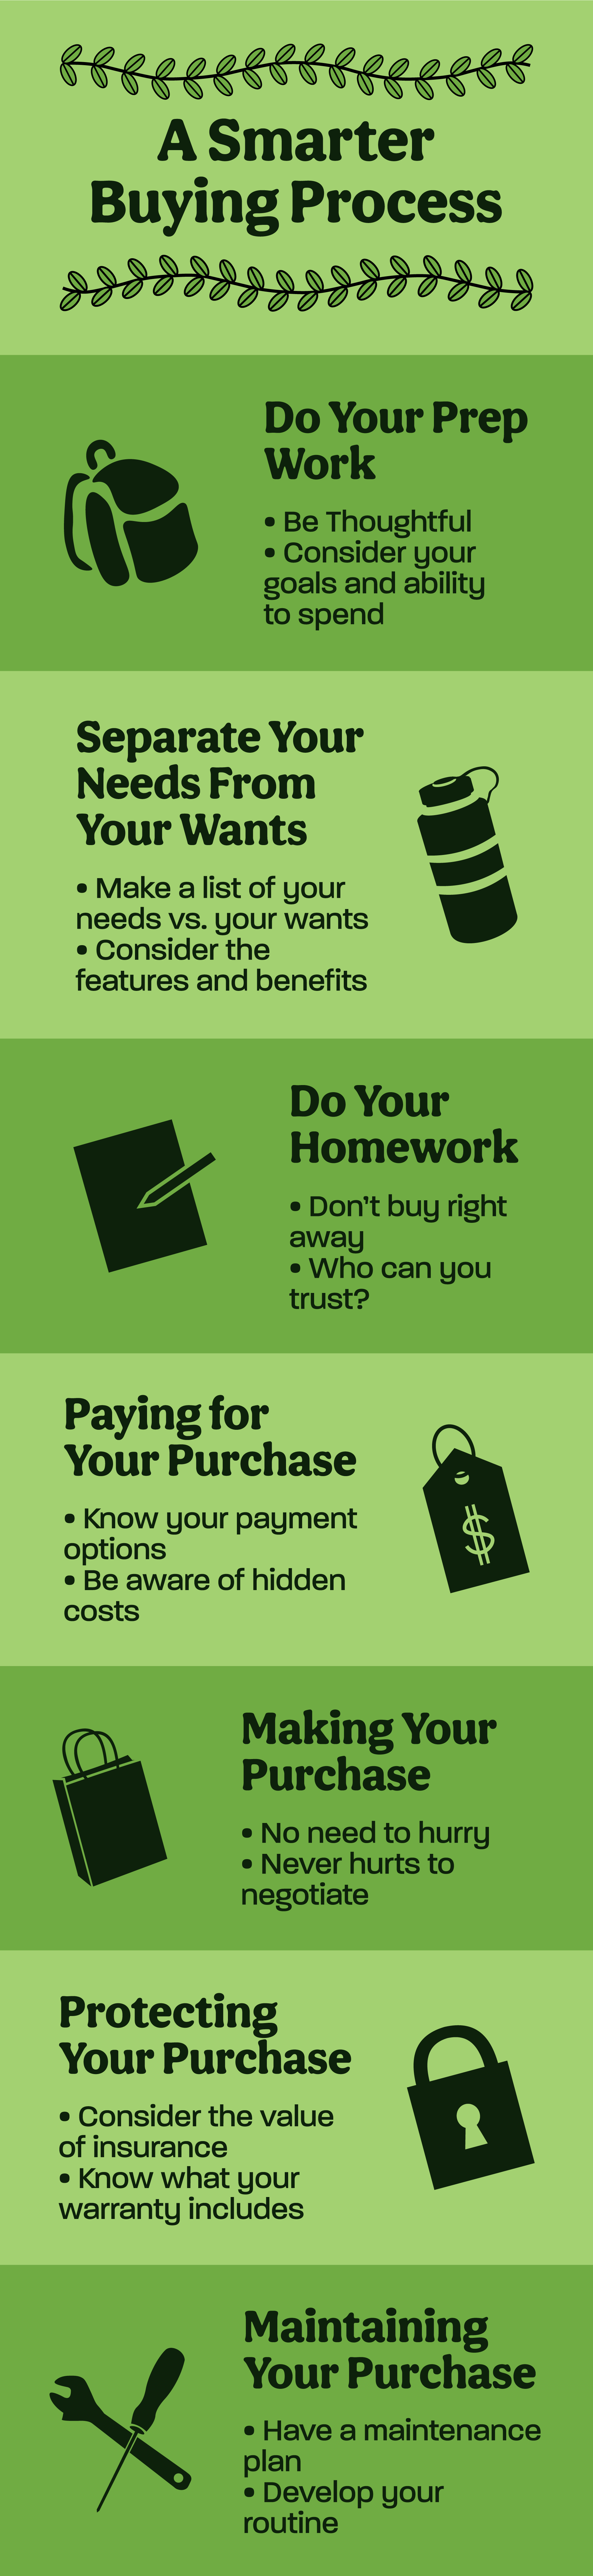 A Smarter Buying Process